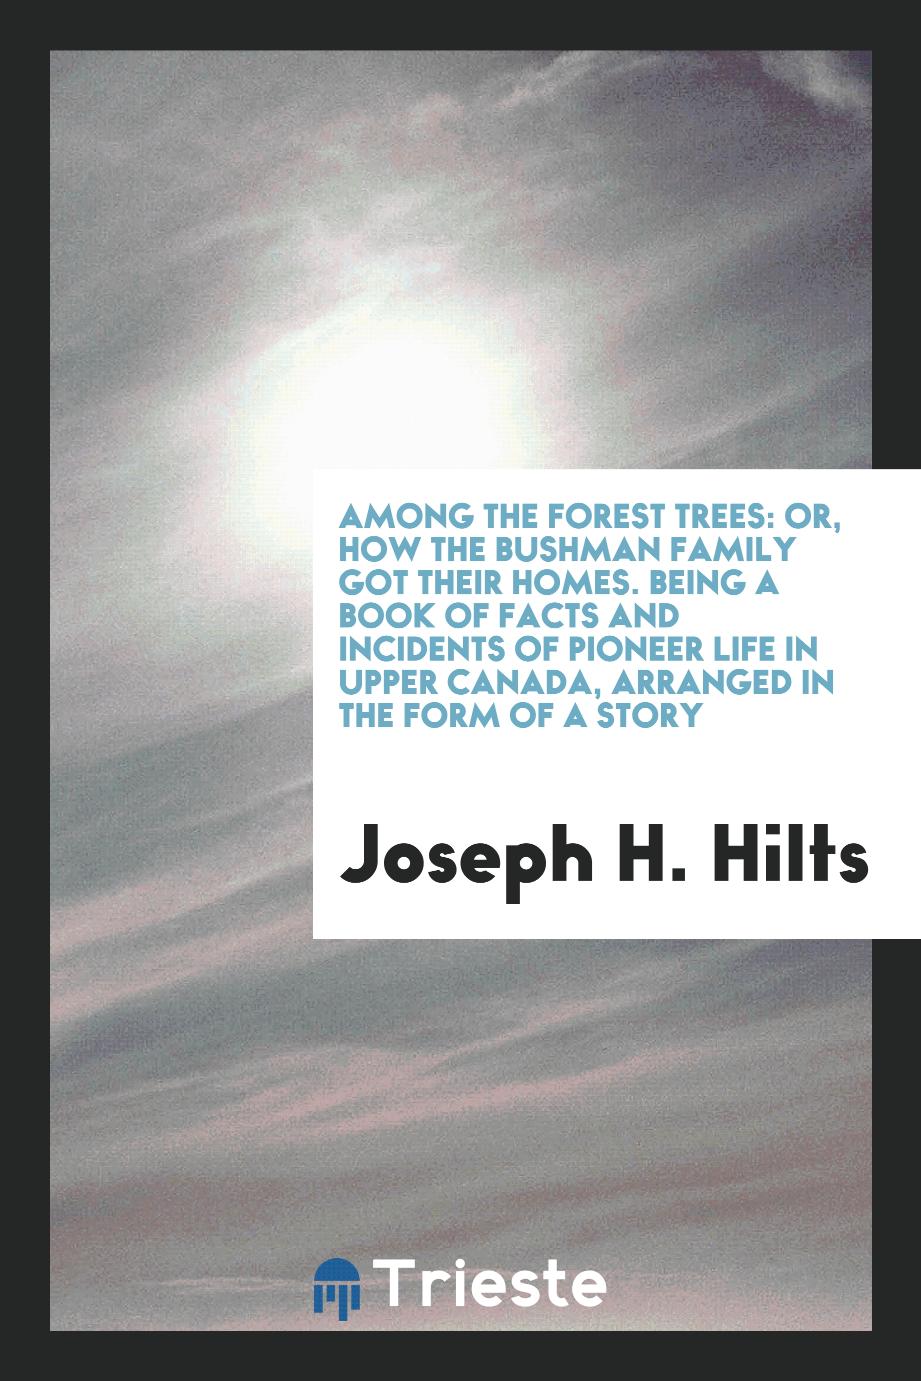 Among the Forest Trees: Or, How the Bushman Family Got Their Homes. Being a Book of Facts and Incidents of Pioneer Life in Upper Canada, Arranged in the Form of a Story